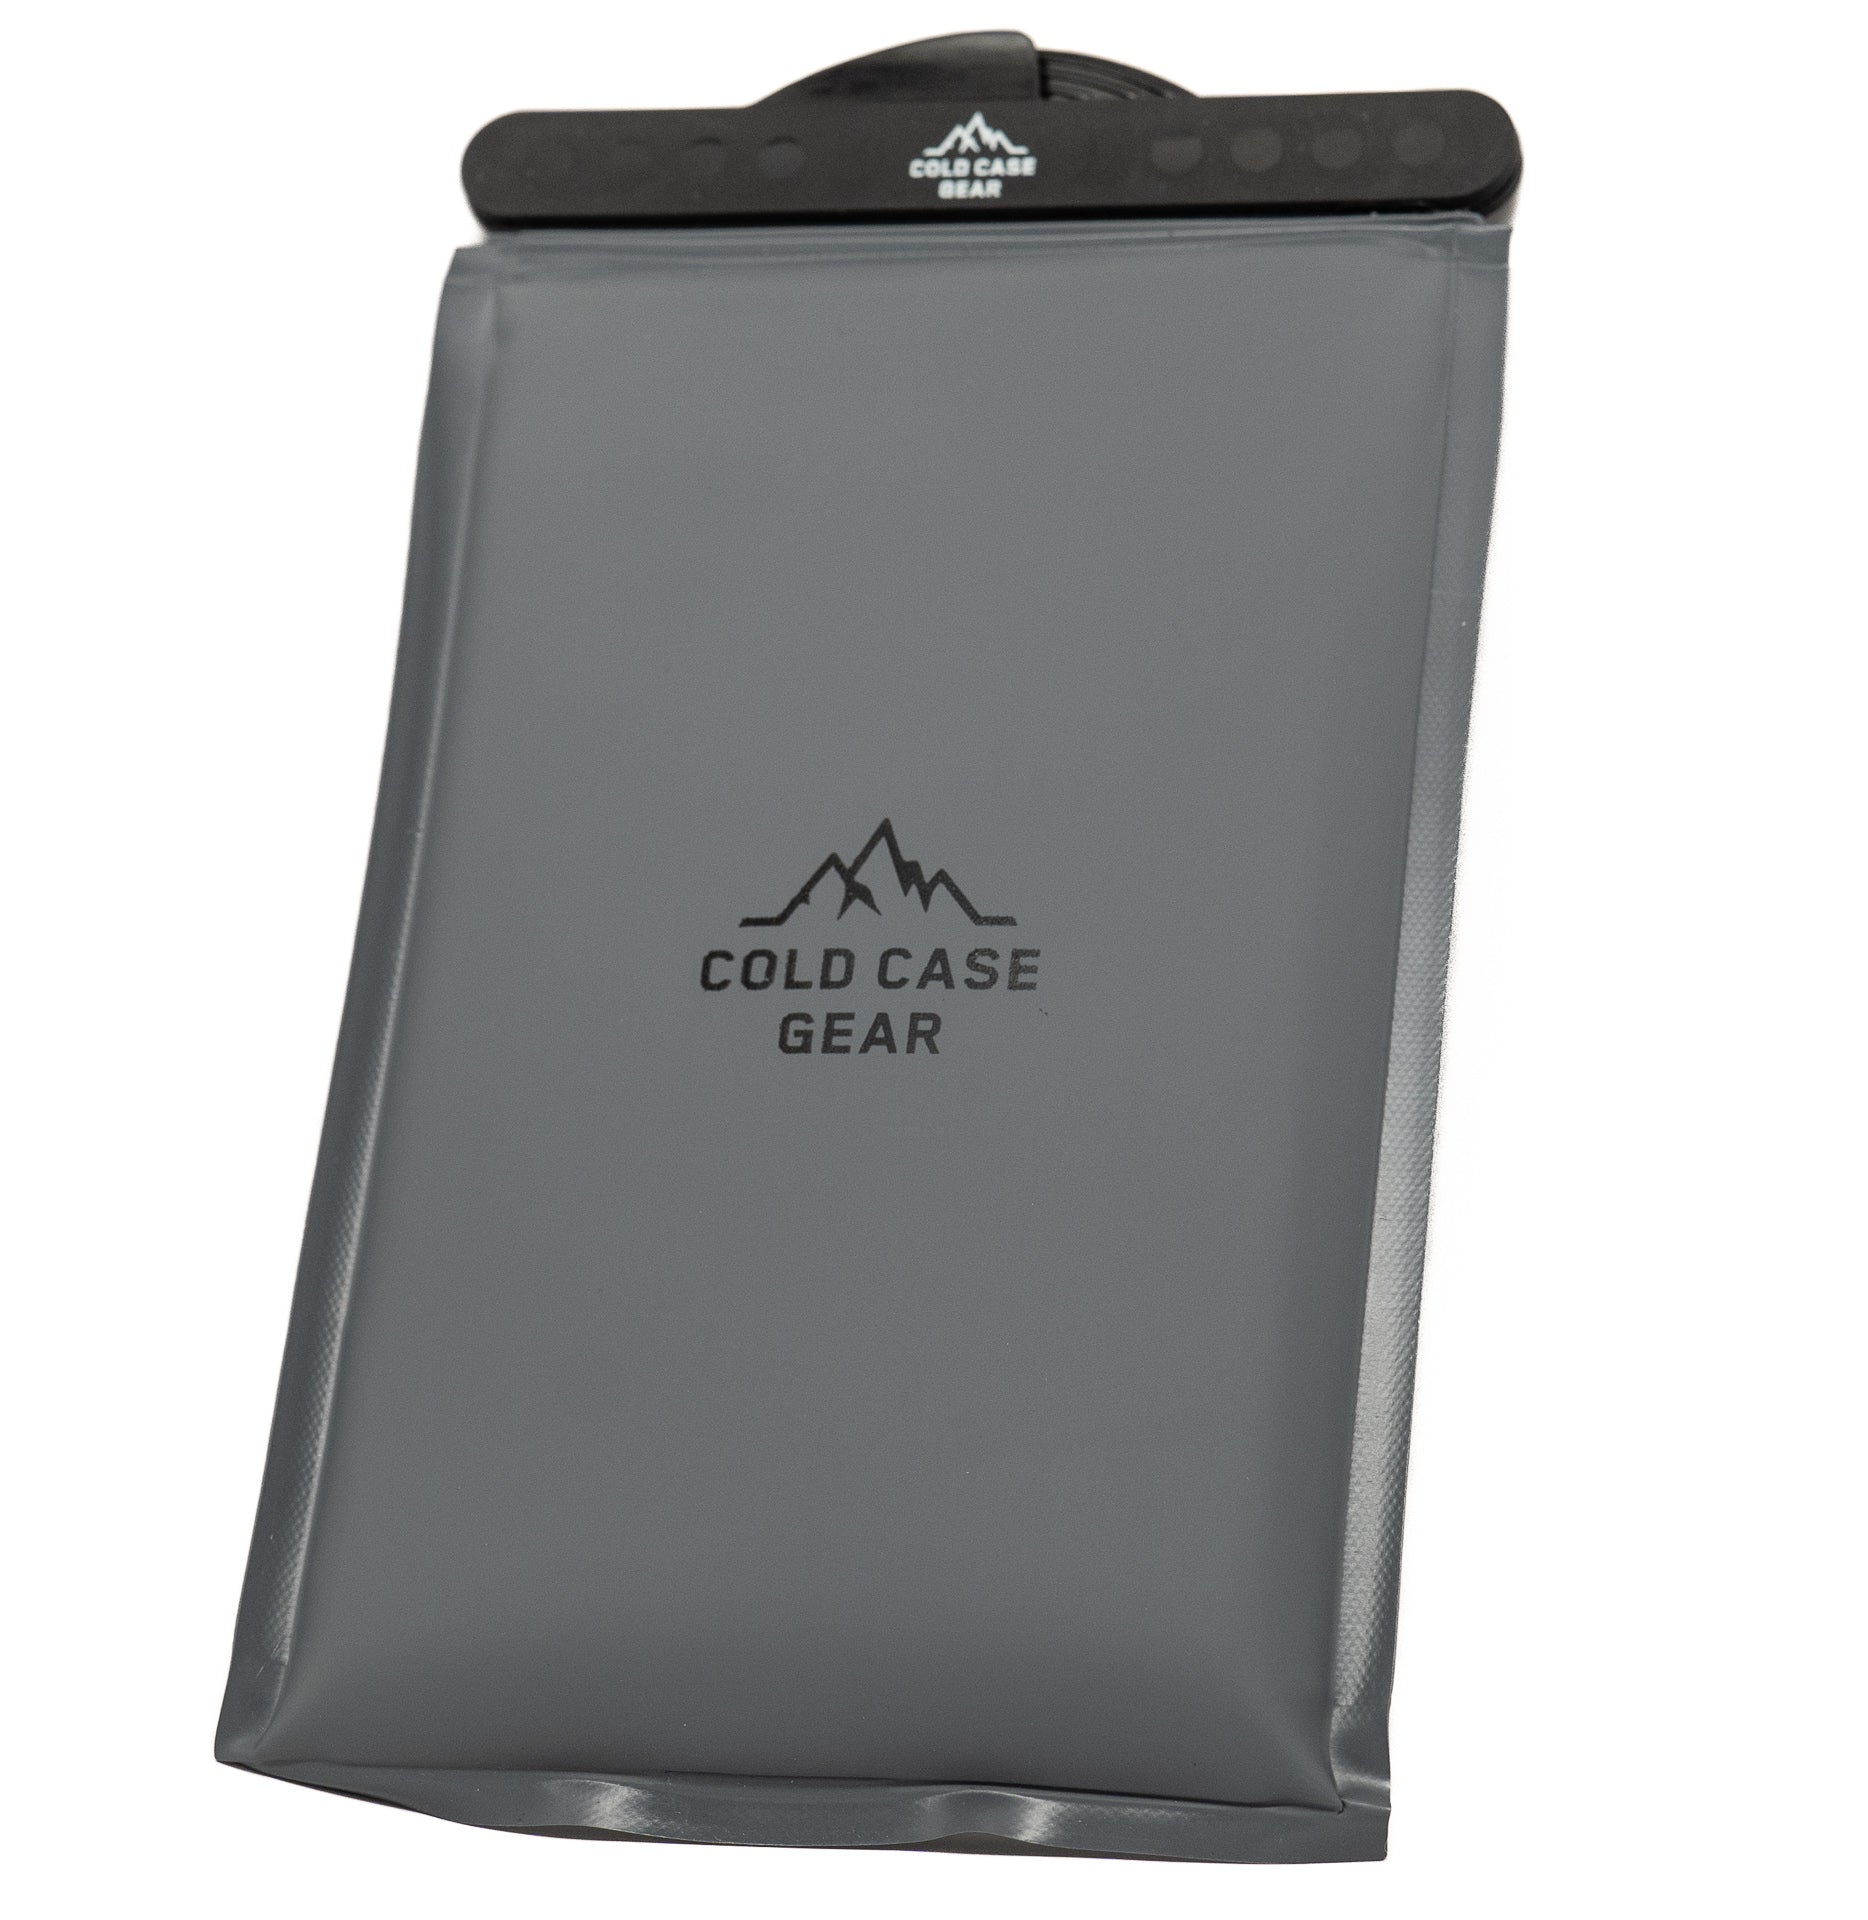 Version 2 of The Cold Case Thermal Phone Case in cool grey